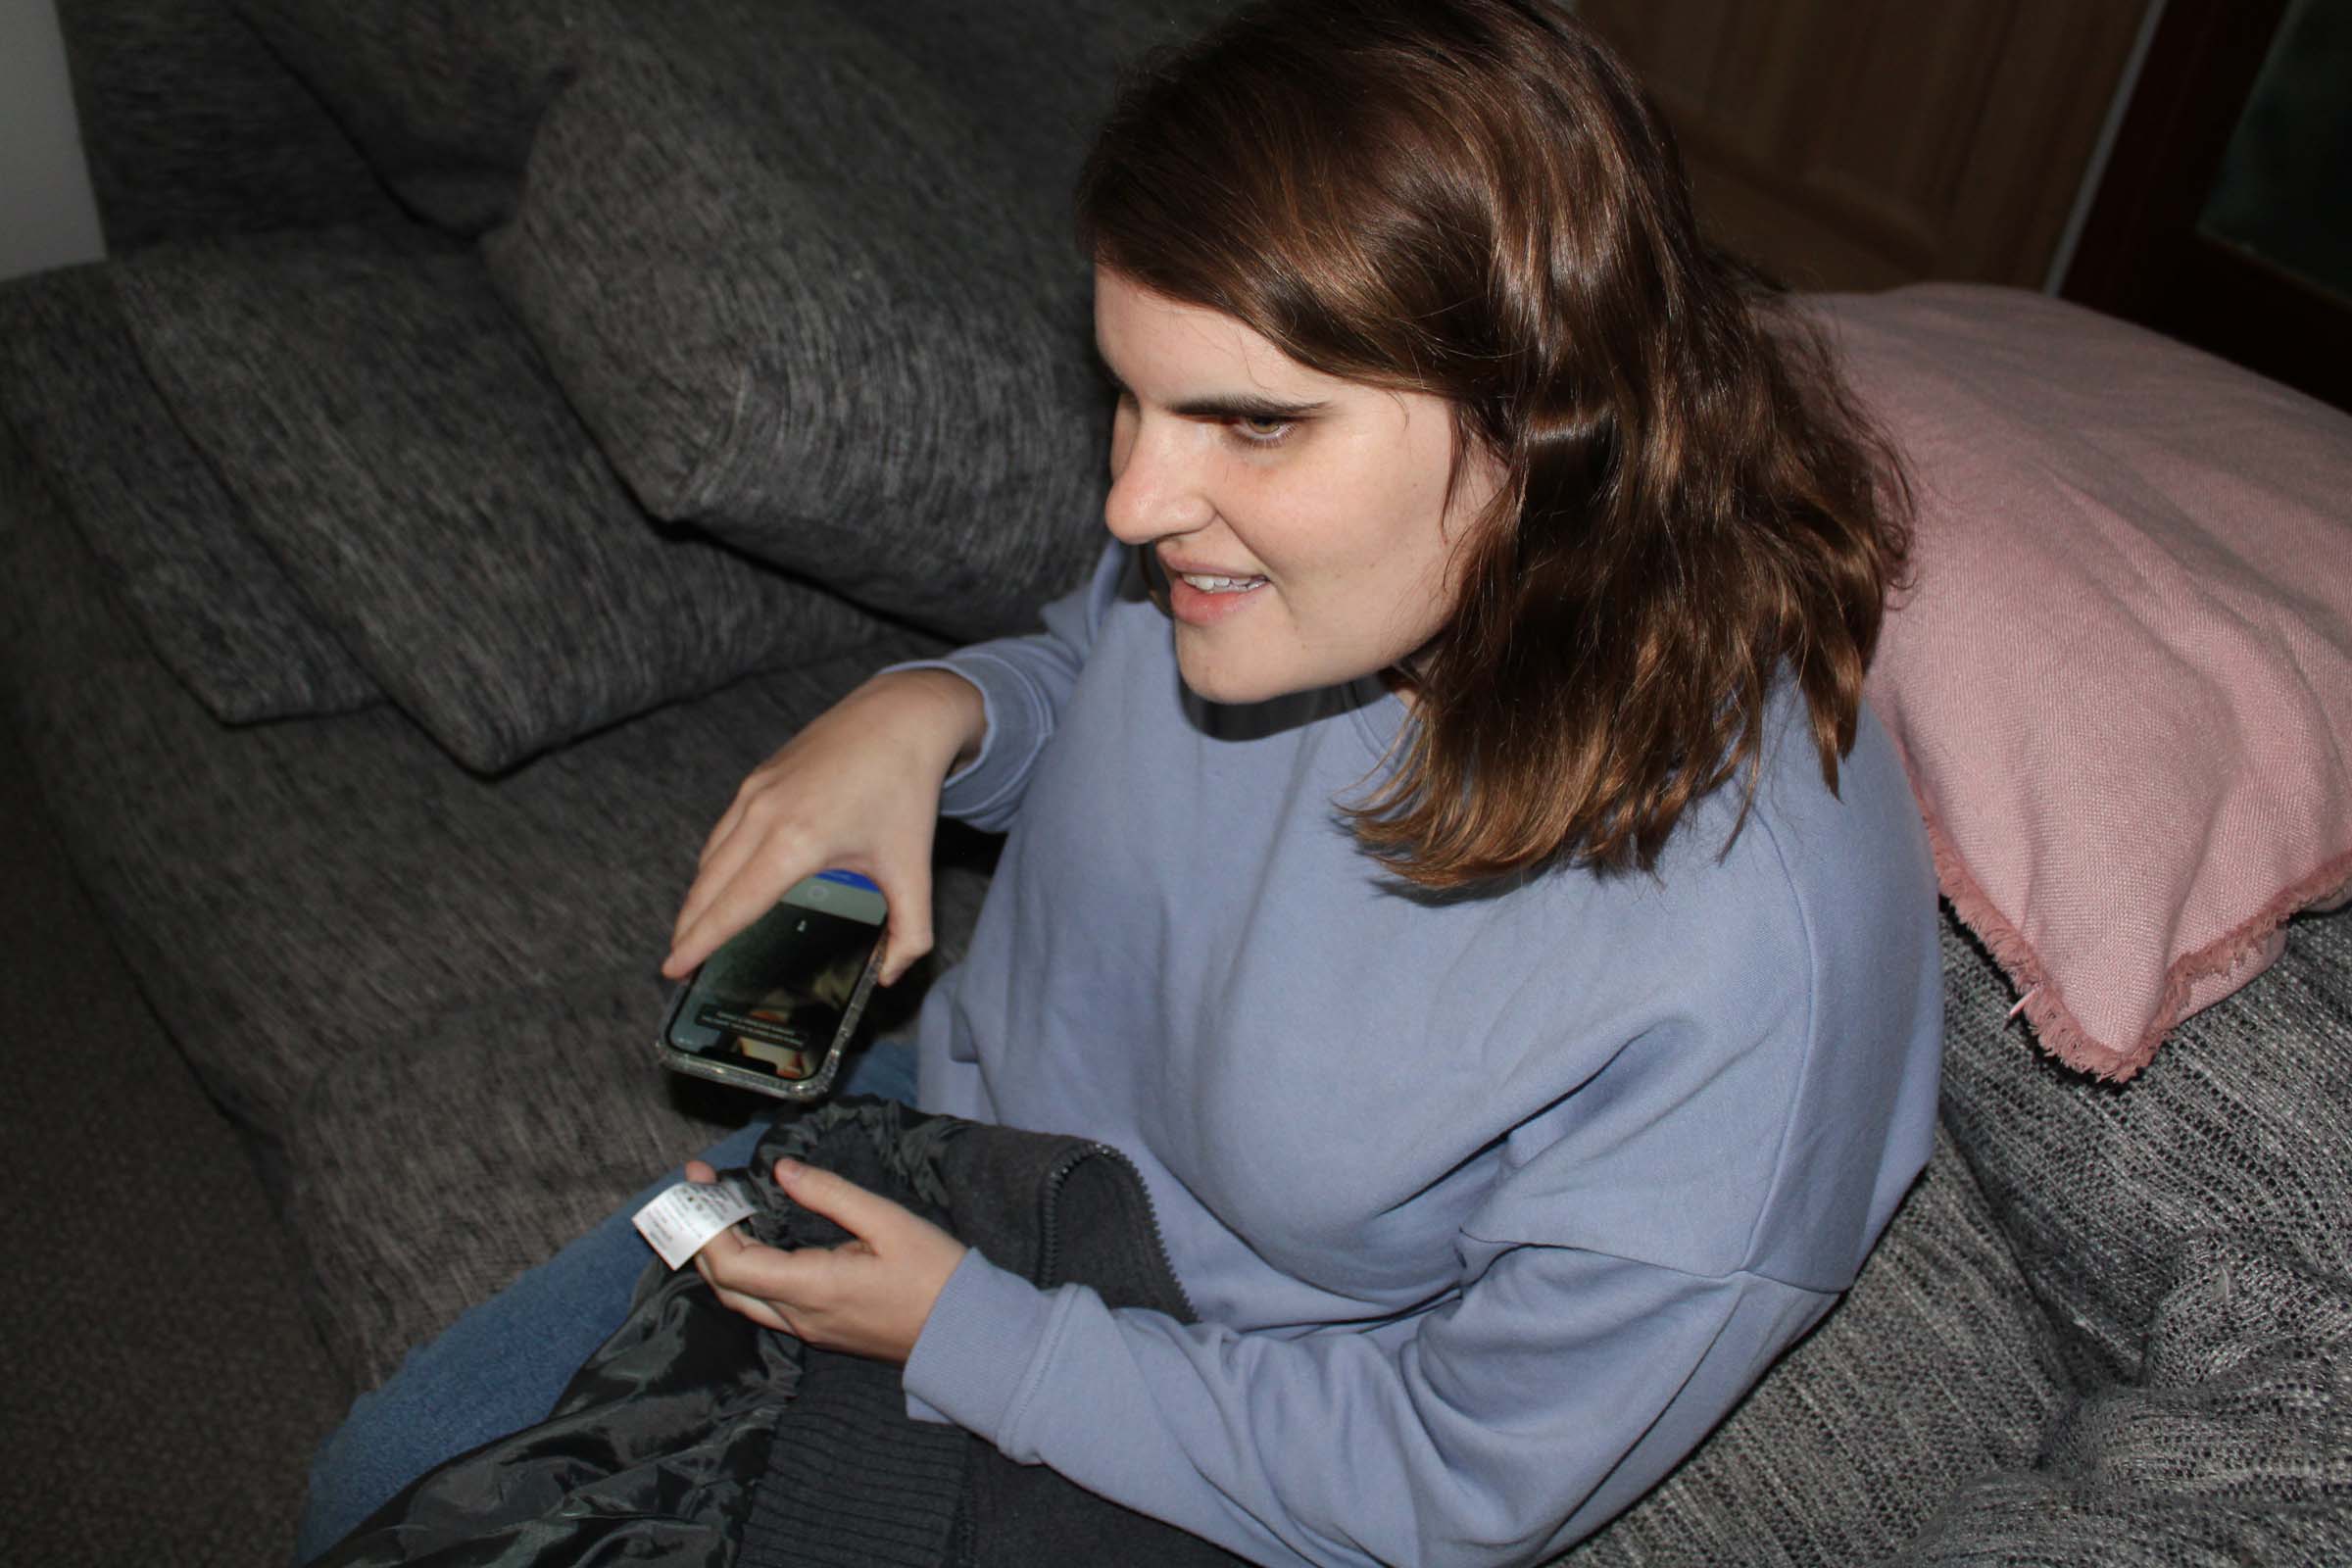 A woman sits on the couch and smiles, holding a smart phone.